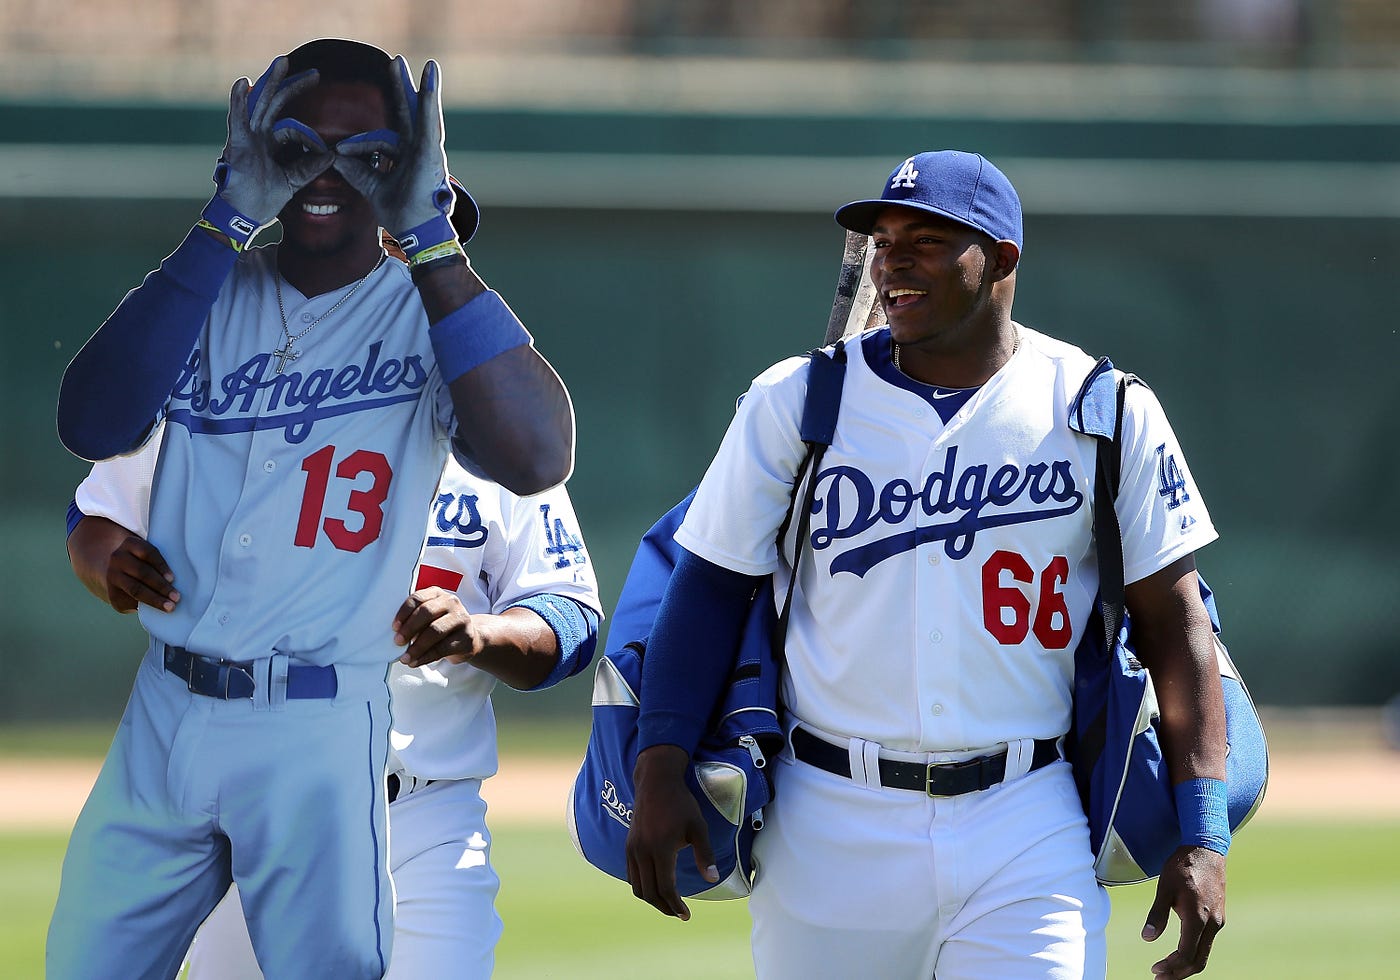 10 Defining Moments of the Decade: A gamechanger for Juan Uribe, by Cary  Osborne